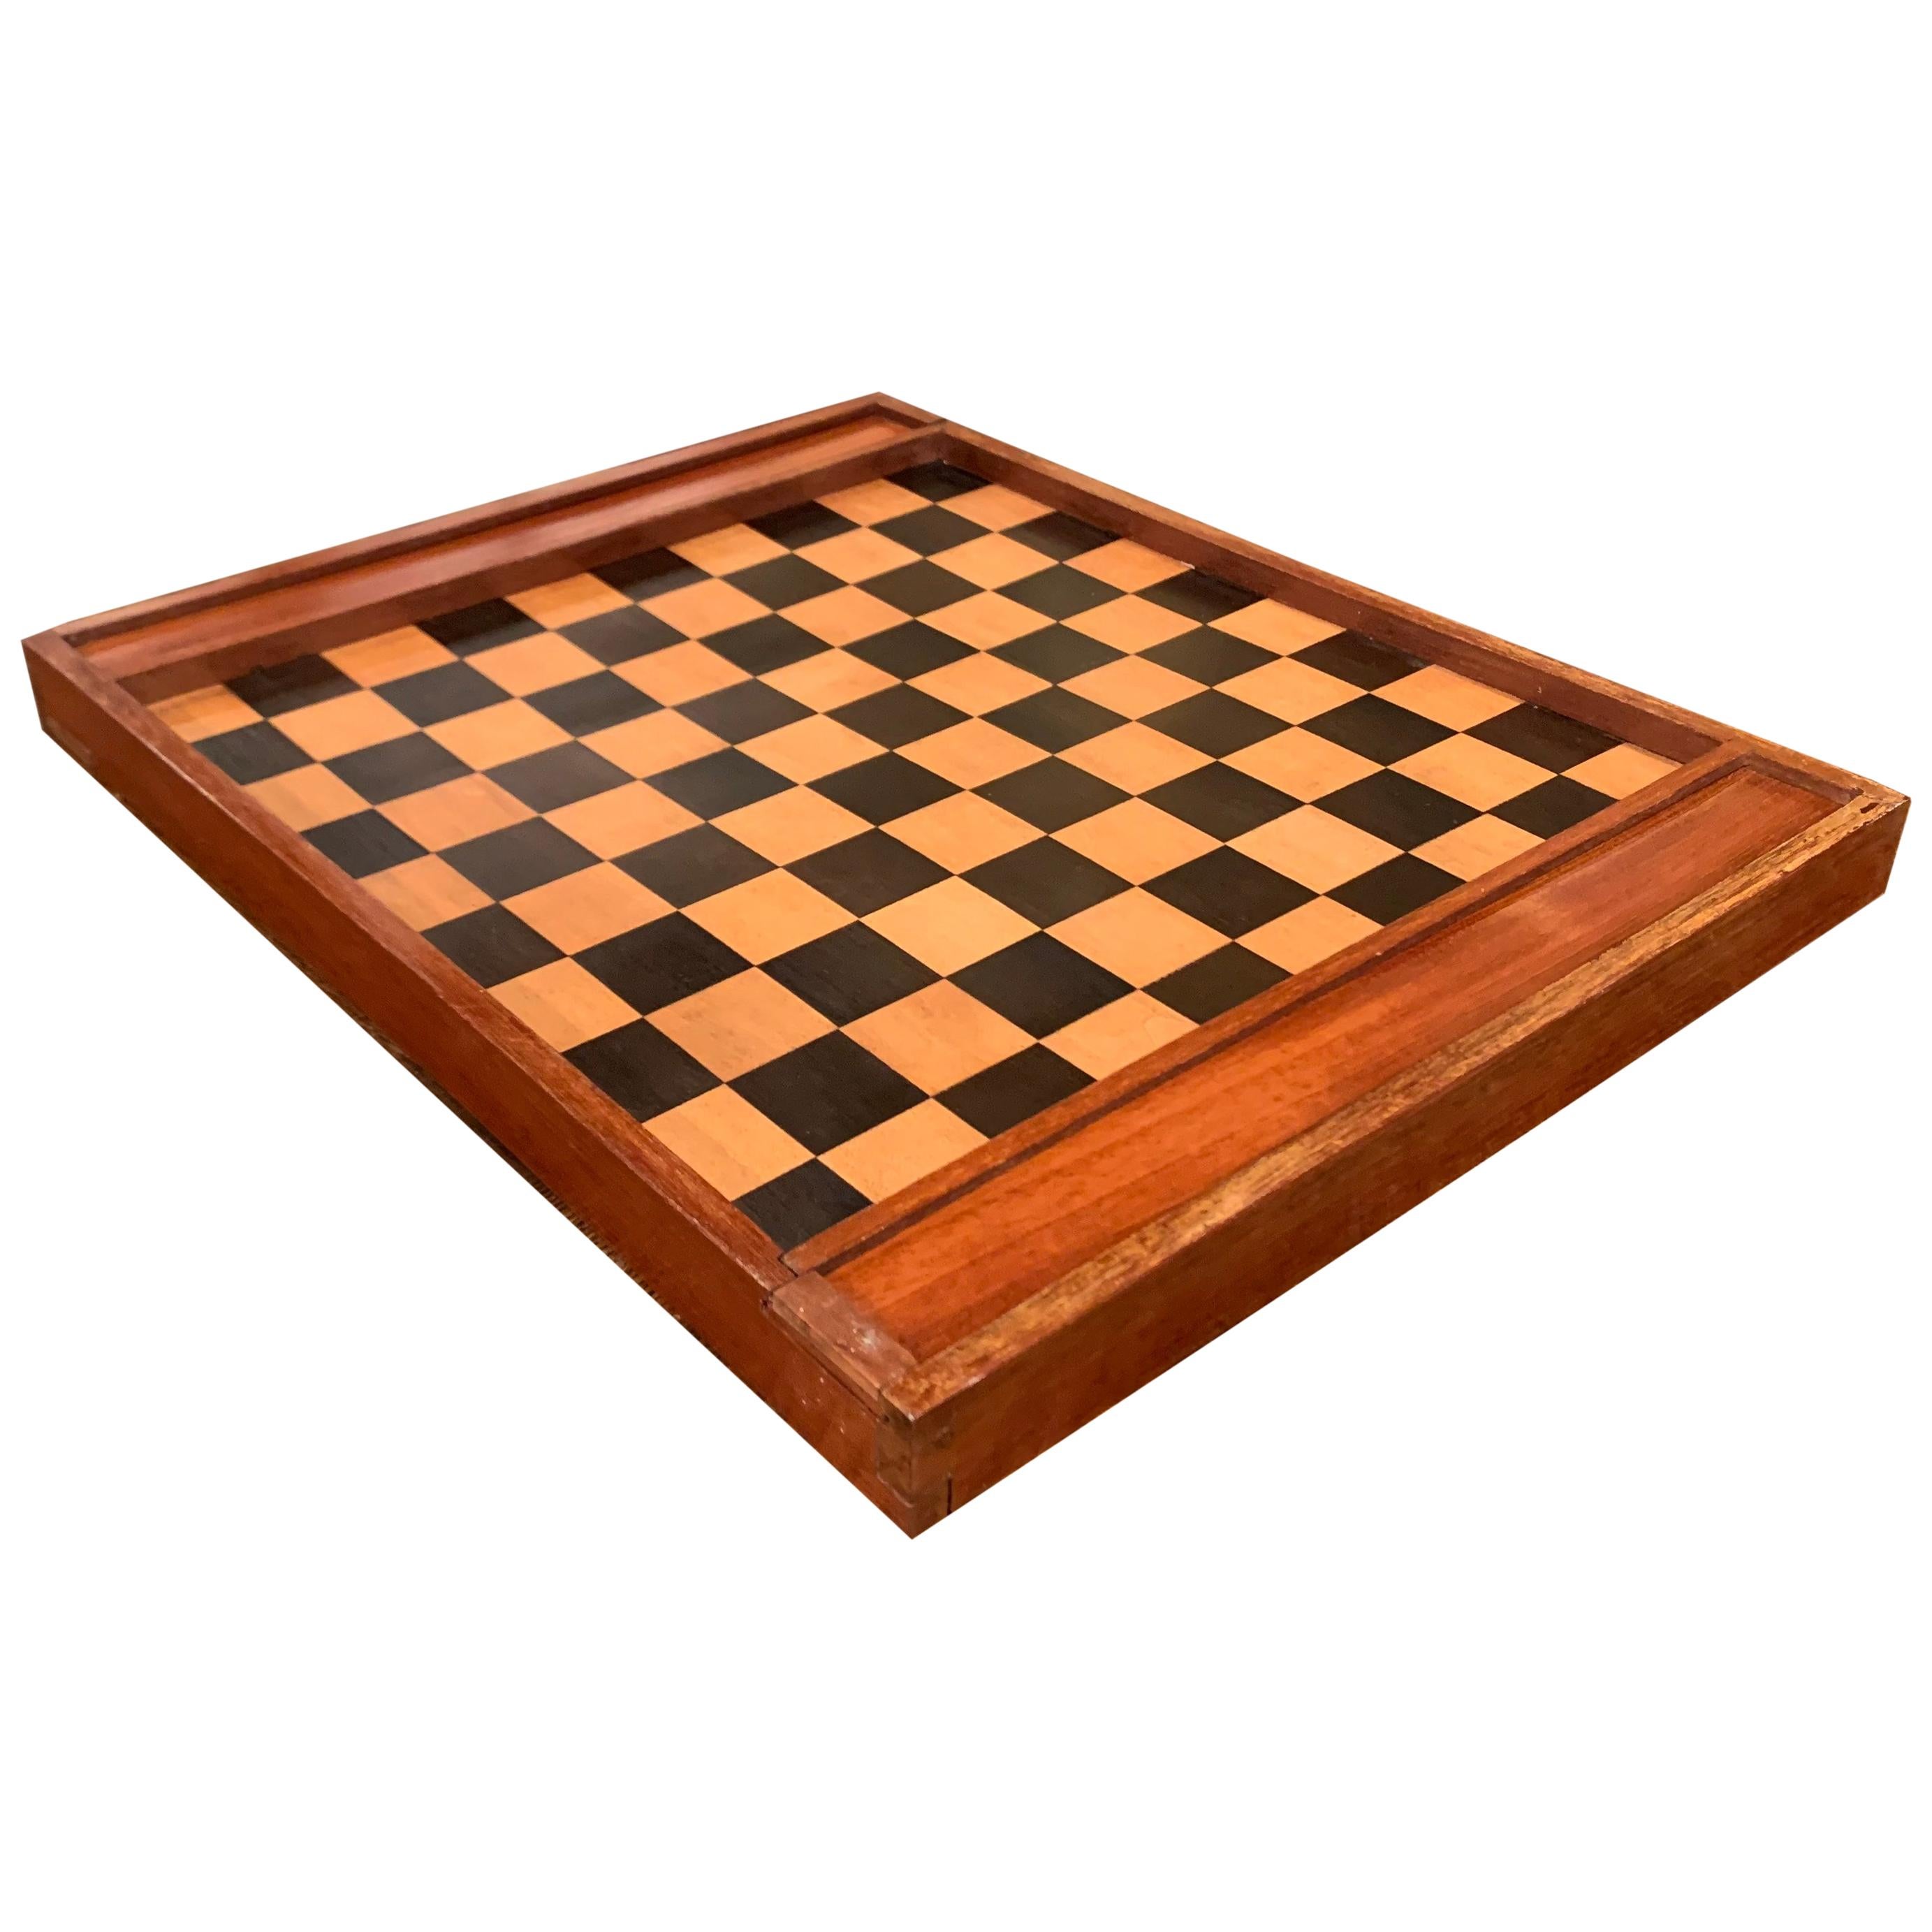 19th Century French Walnut Complete Checkers Board Game